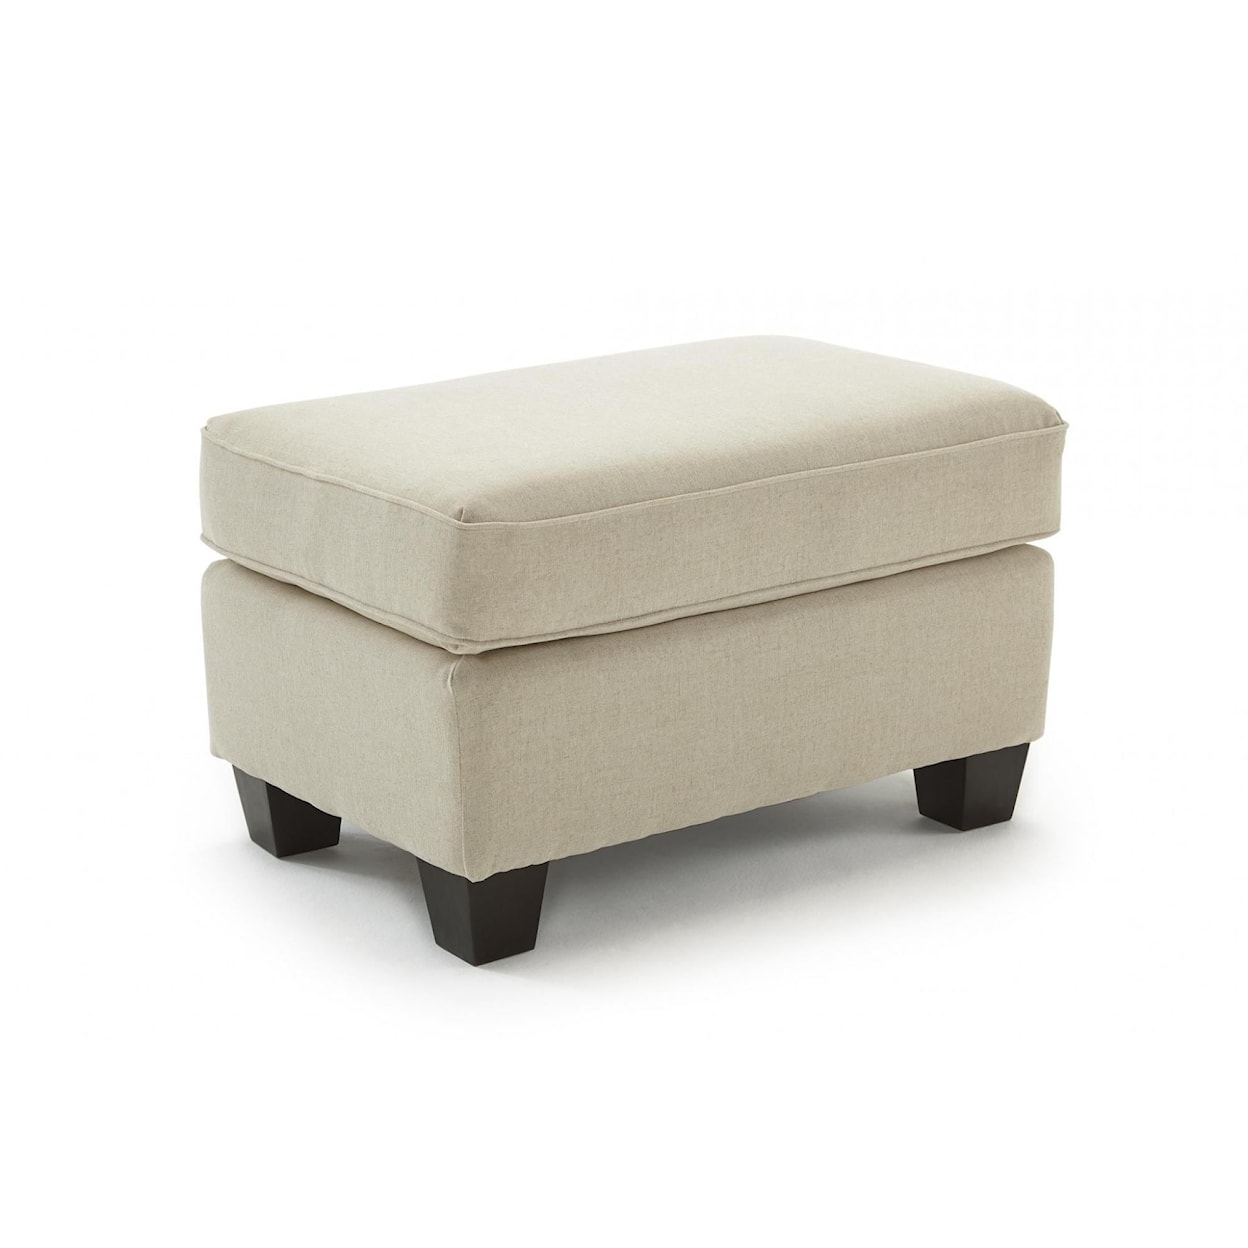 Best Home Furnishings Annabel Ottoman with Exposed Wooden Legs